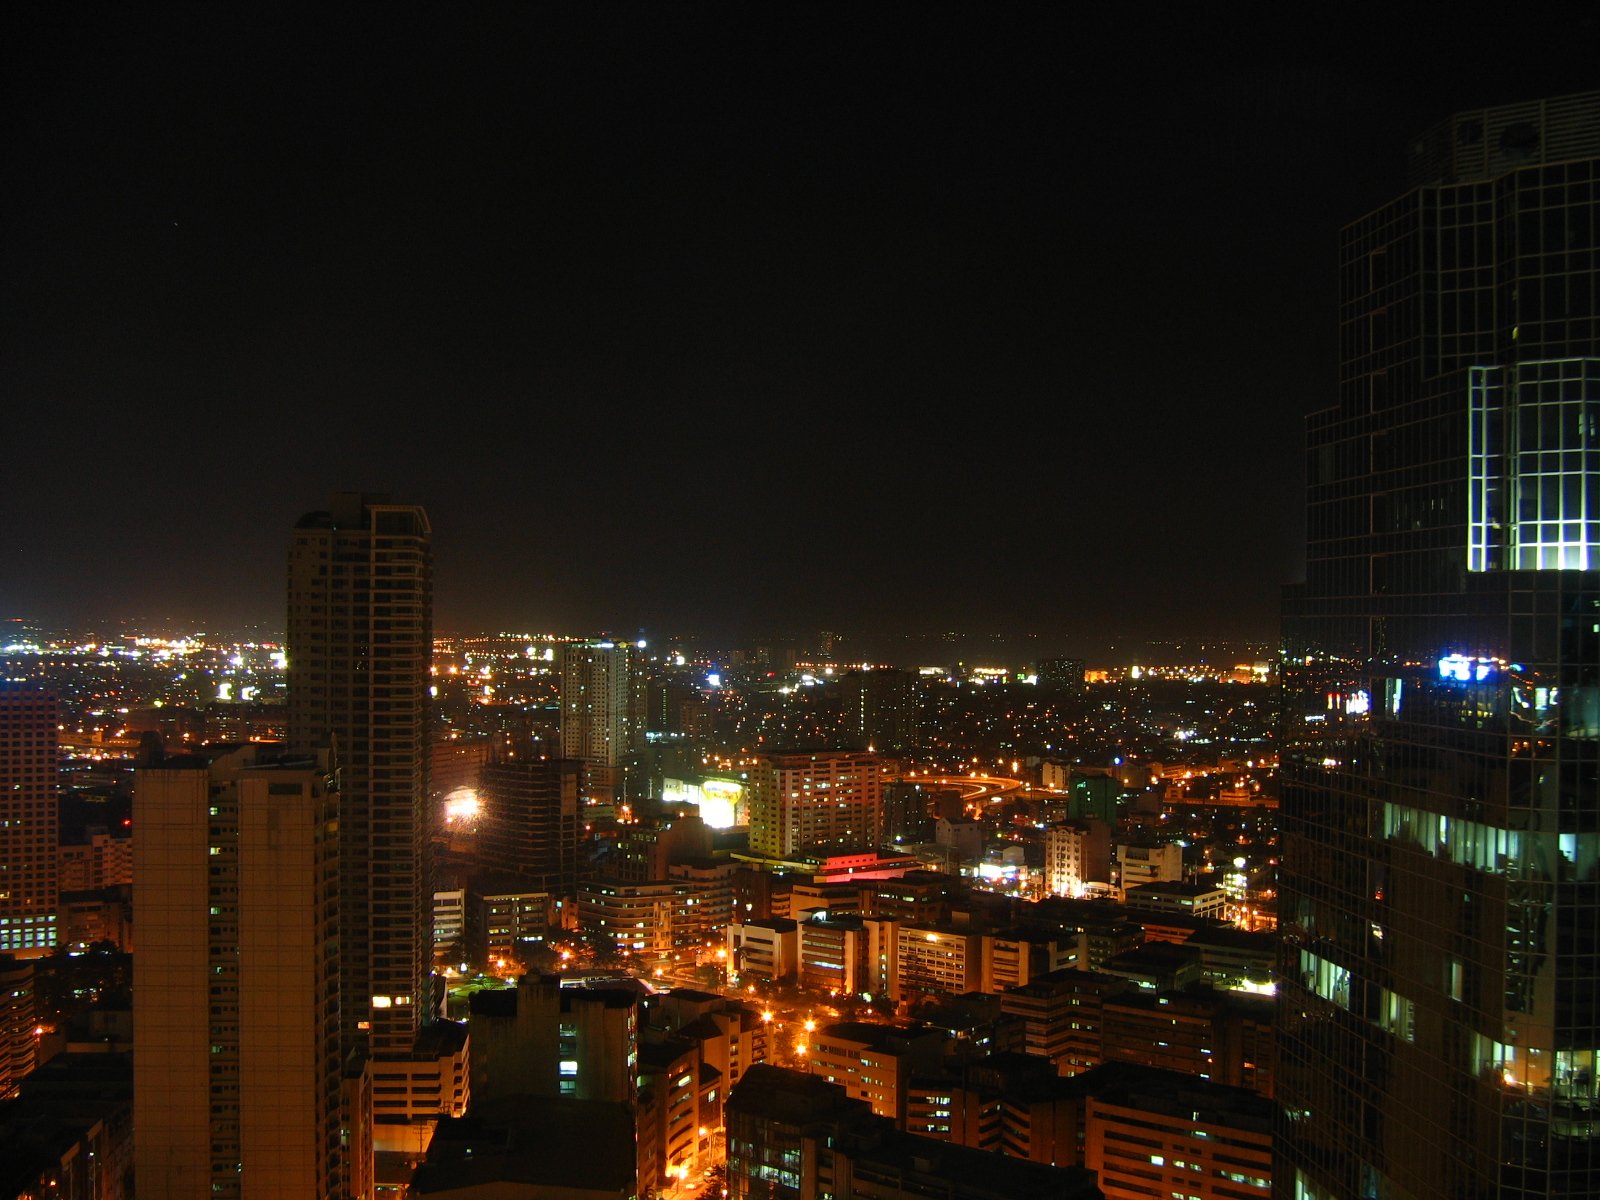 the view from the roof of the building at night